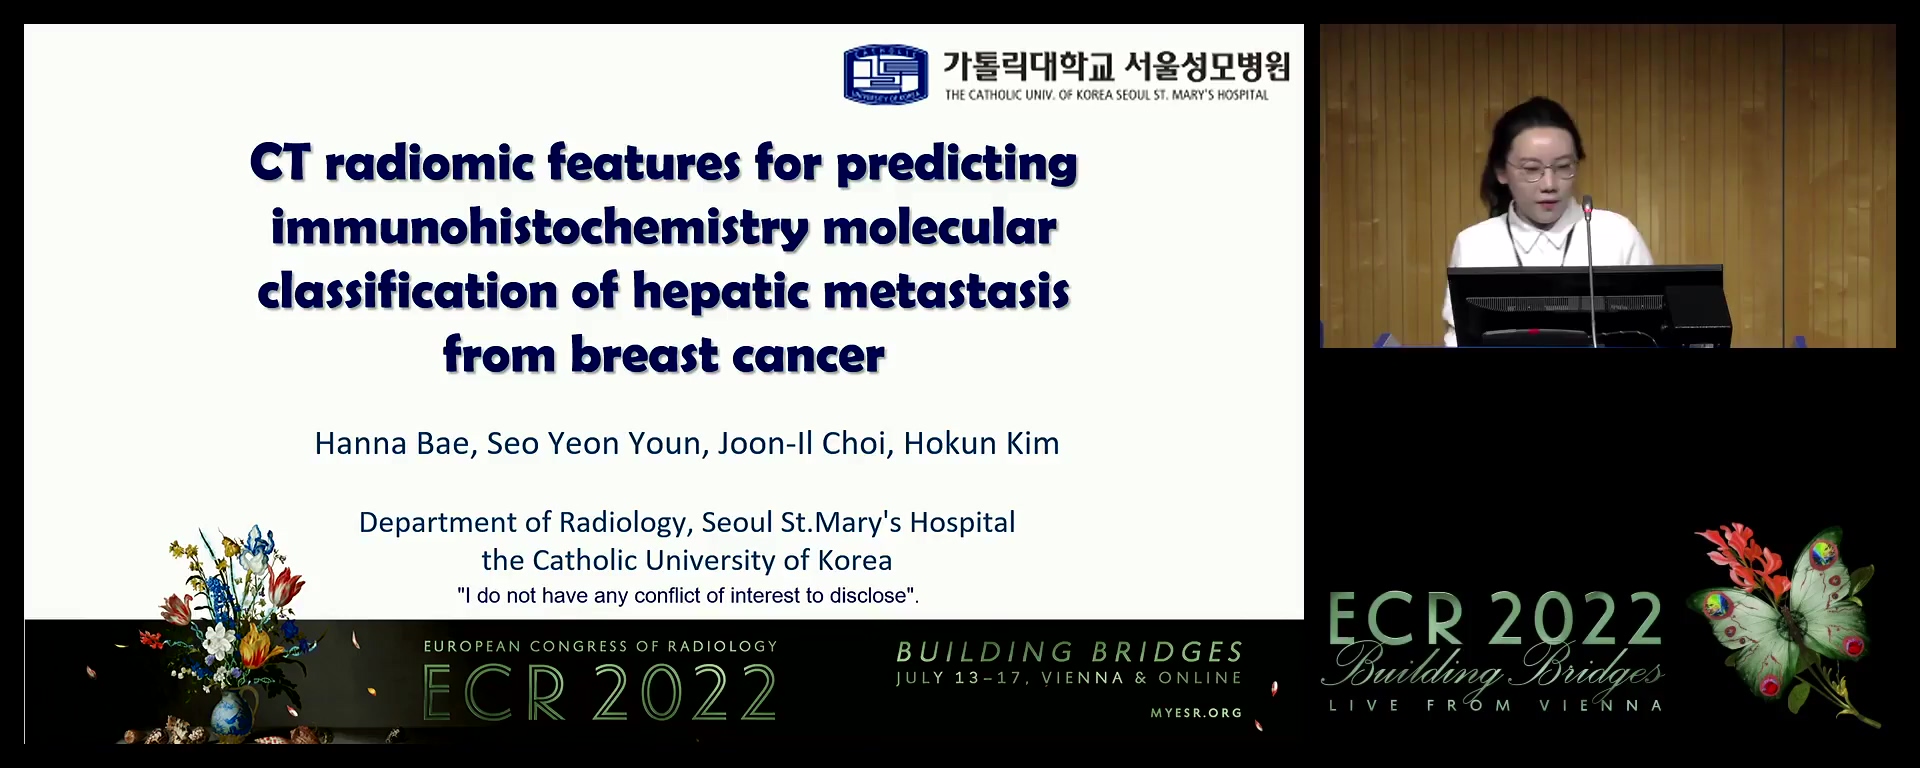 CT radiomic features of hepatic metastasis for predicting immunohistochemistry molecular classification of primary breast cancer - Hanna Bae, Seoul / KR